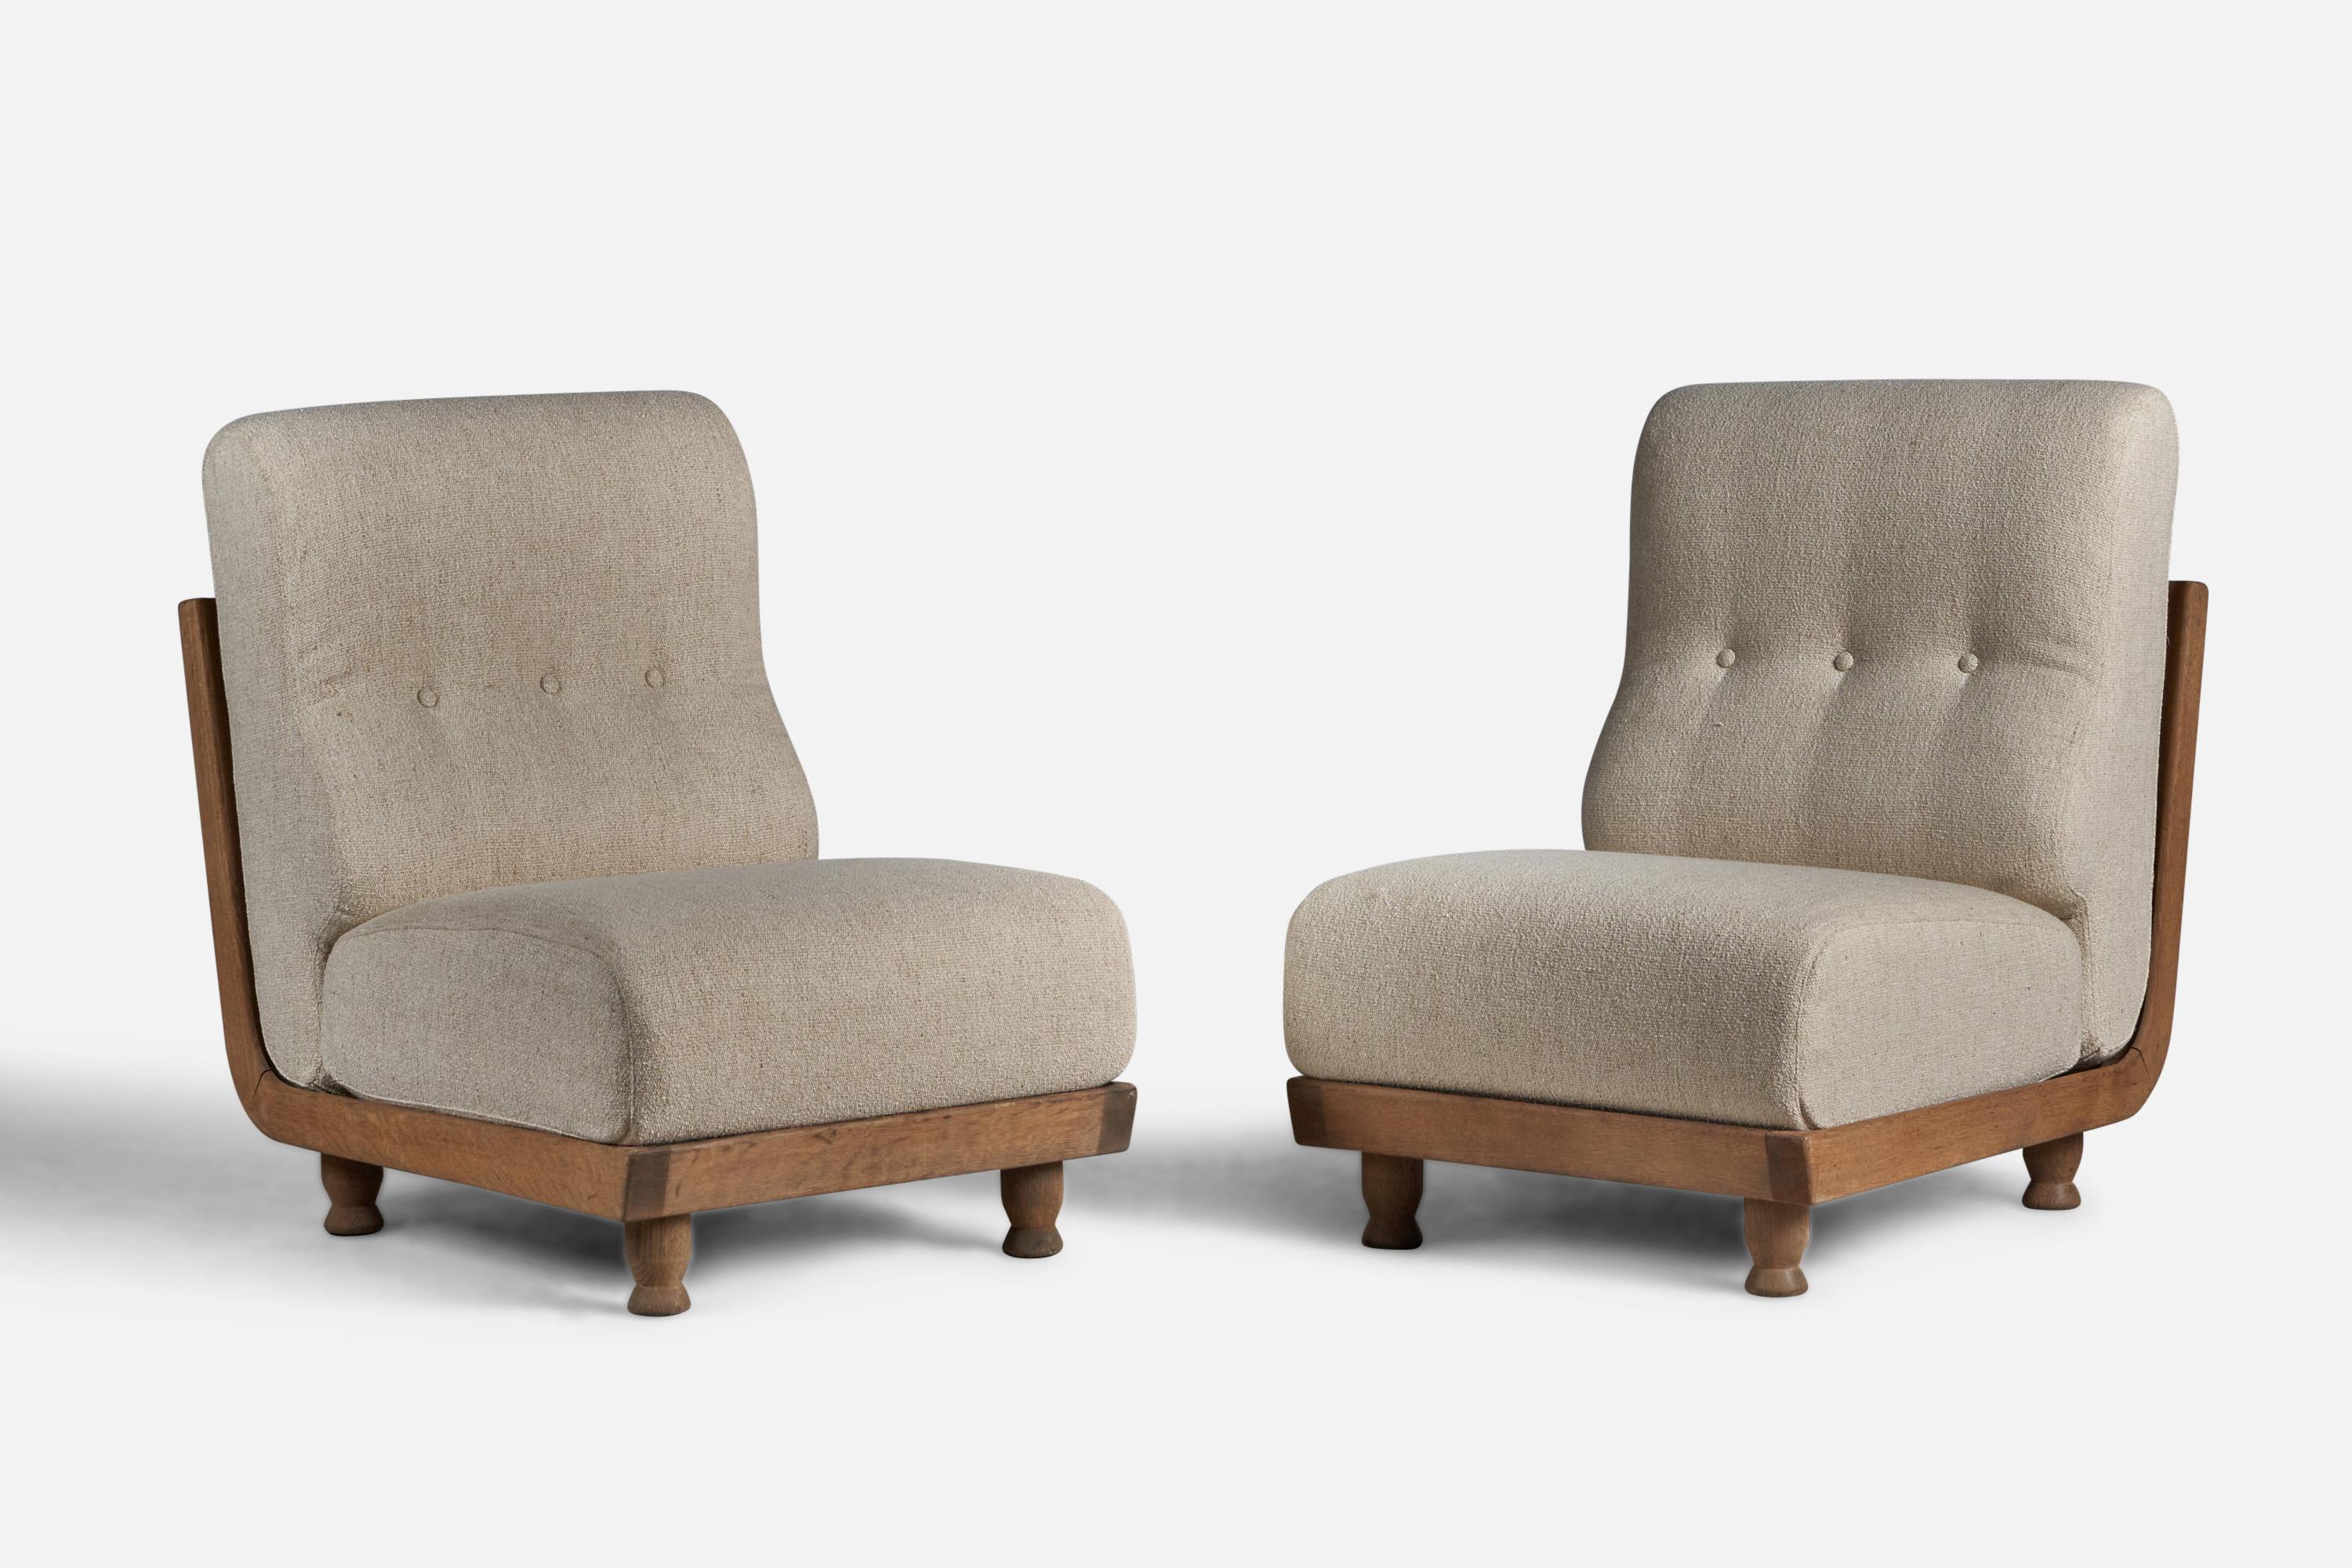 A pair of beige fabric and oak lounge or slipper chairs designed by Robert Guillerme and Jacques Chambron, France, 1950s.

16.5” seat height